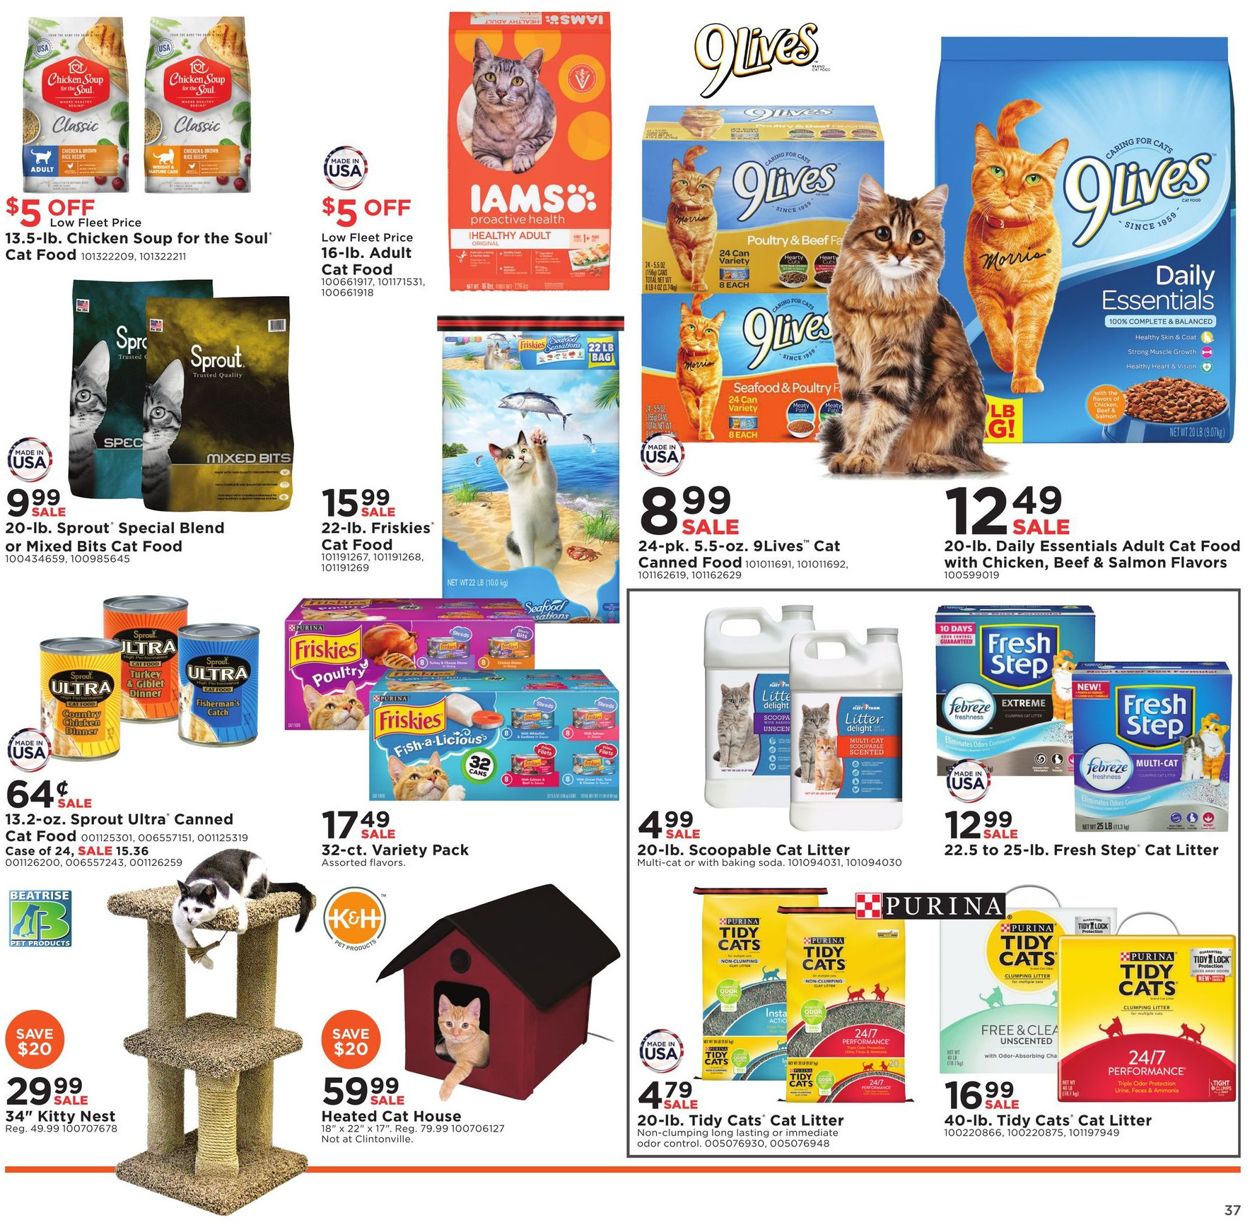 mills-fleet-farm-current-weekly-ad-10-25-11-02-2019-37-frequent